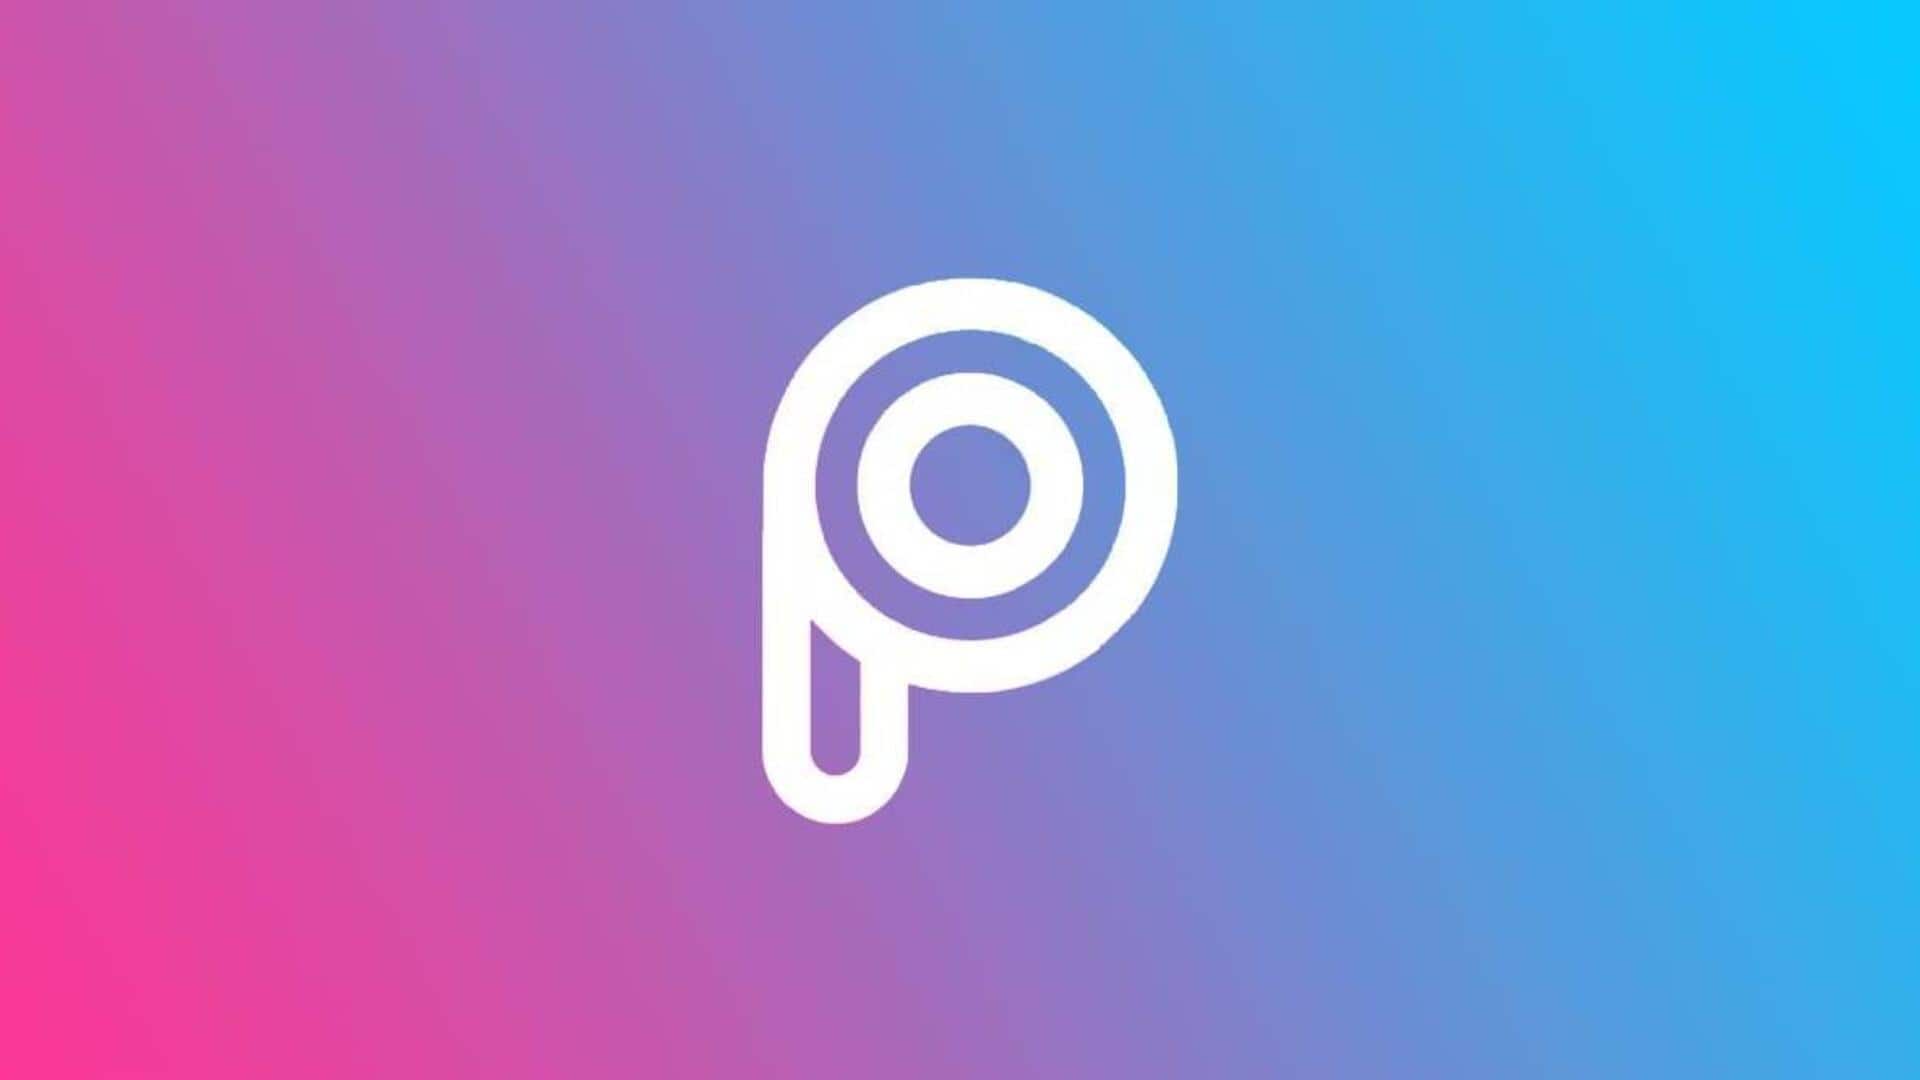 Picsart collaborates with Getty Images to develop custom AI model